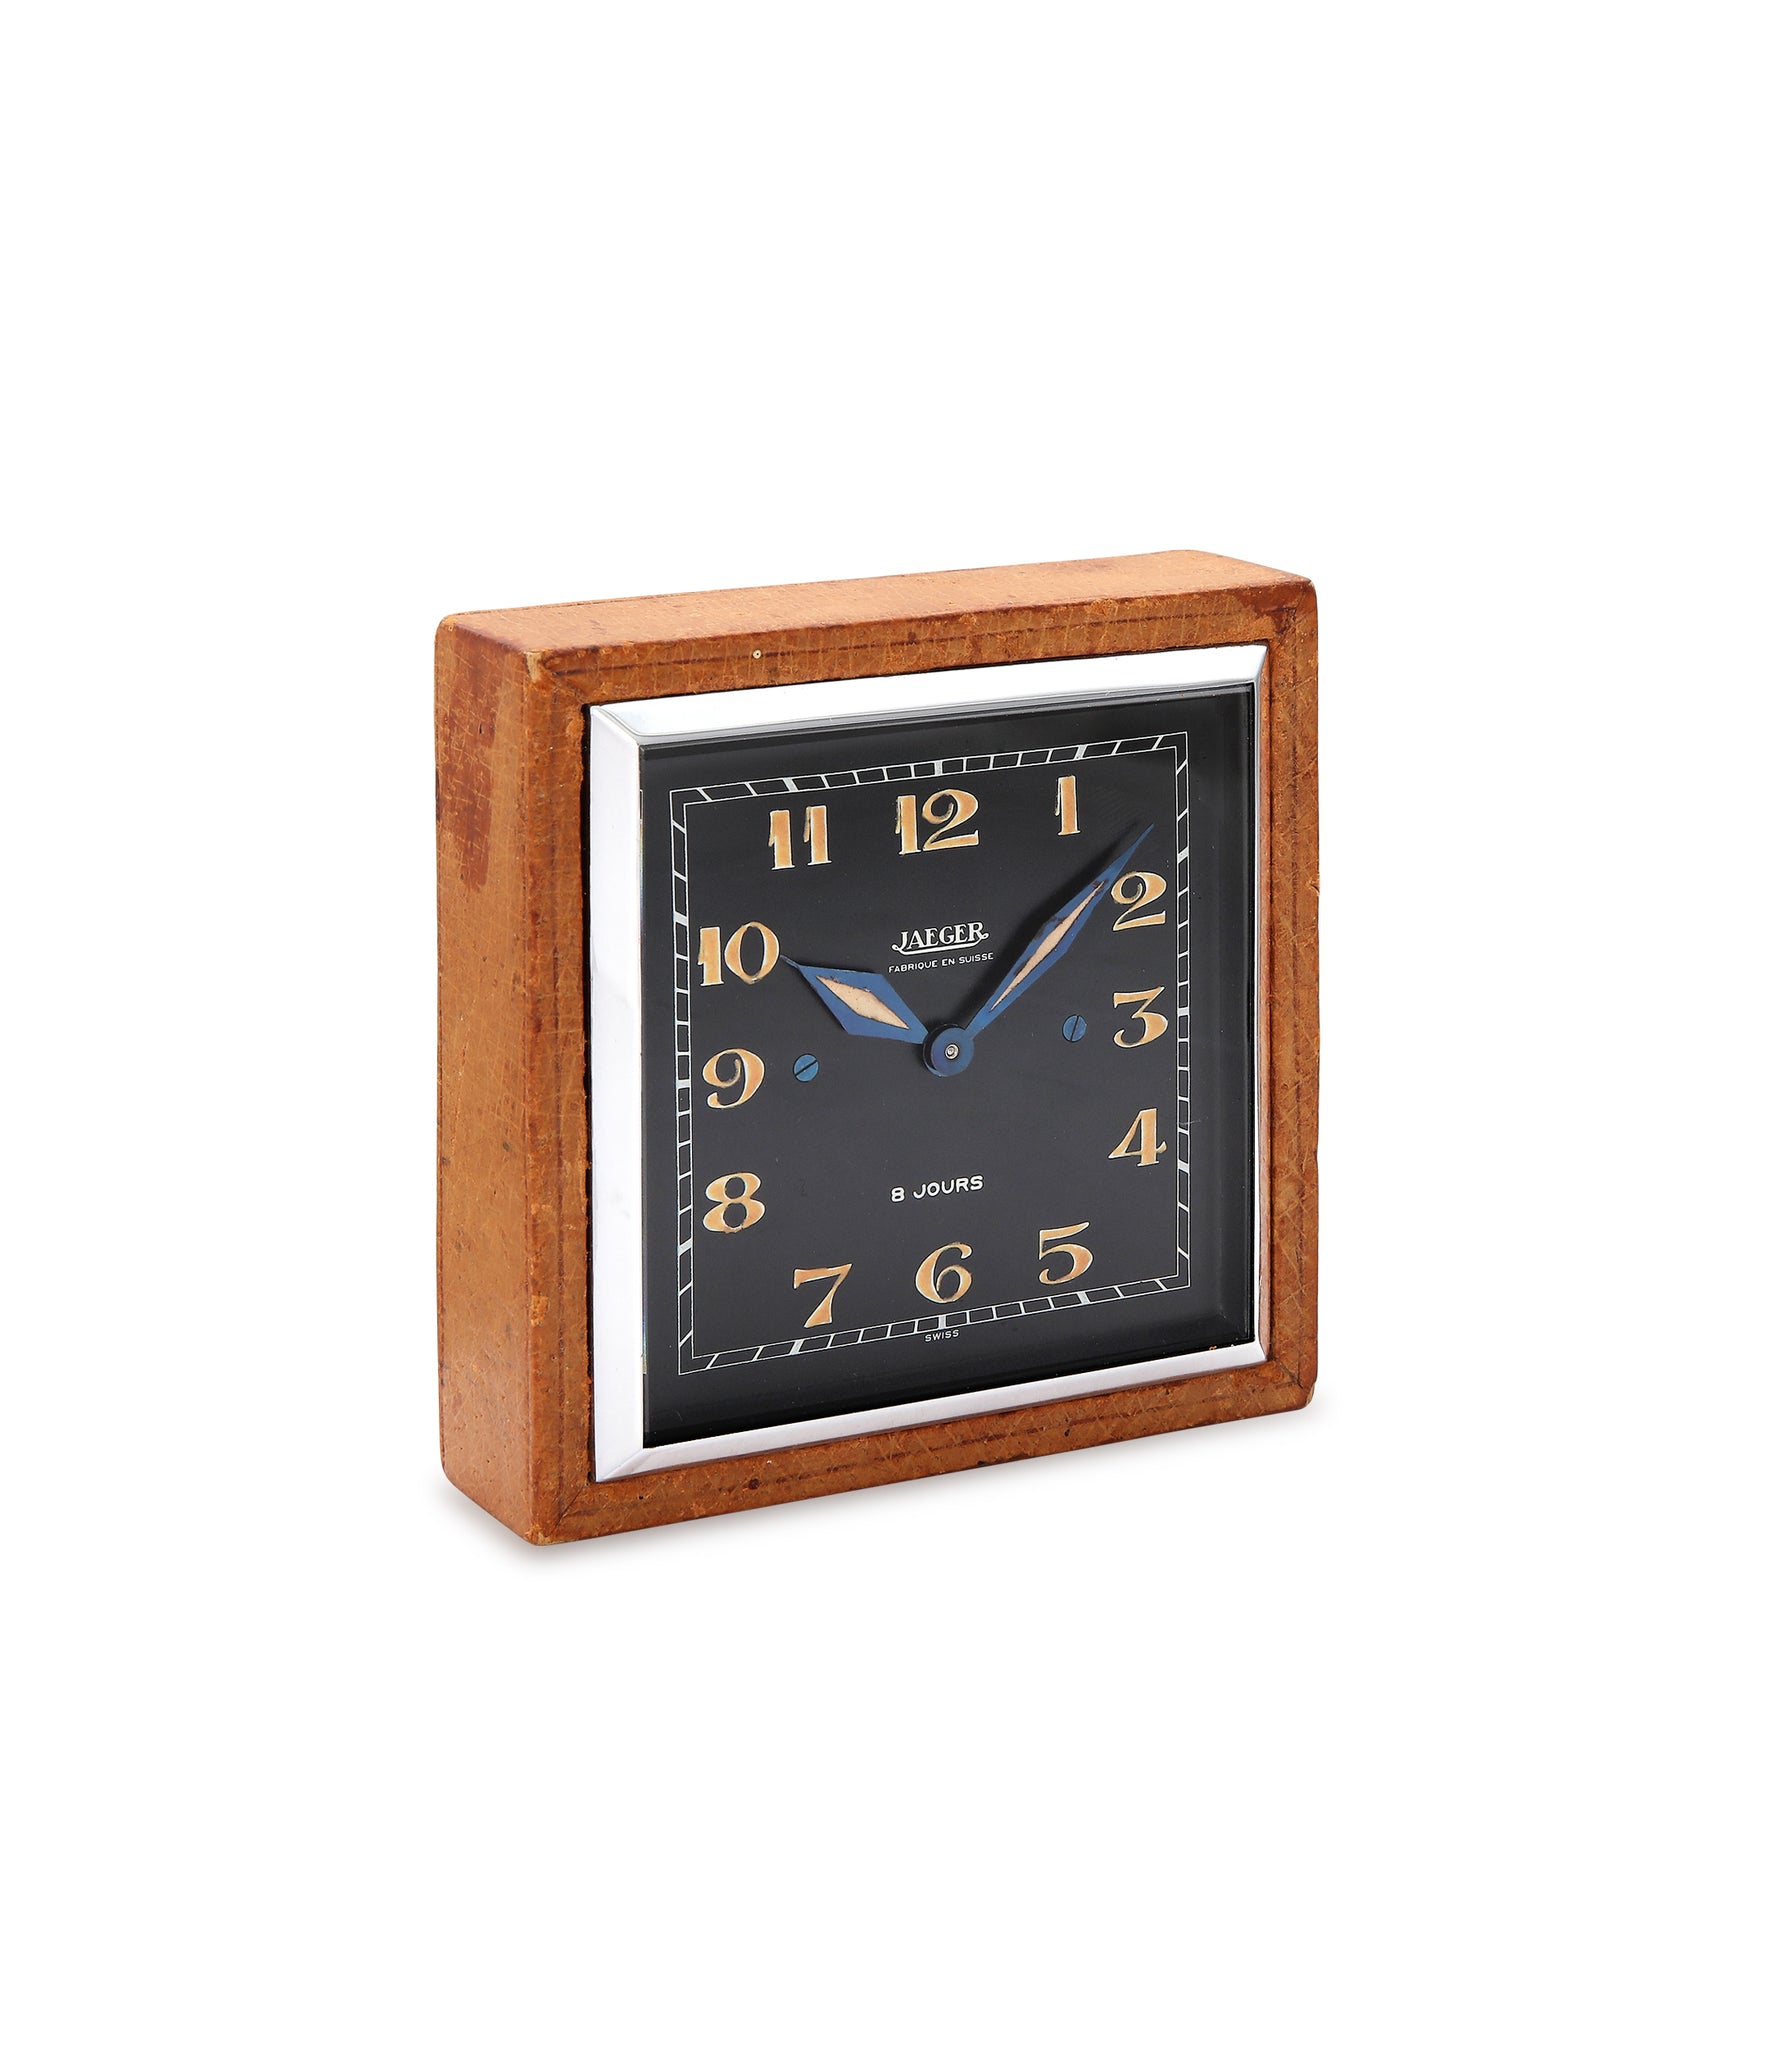 Jaeger-LeCoultre Paperweight Wooden Desk Clock | A Collected Man, London